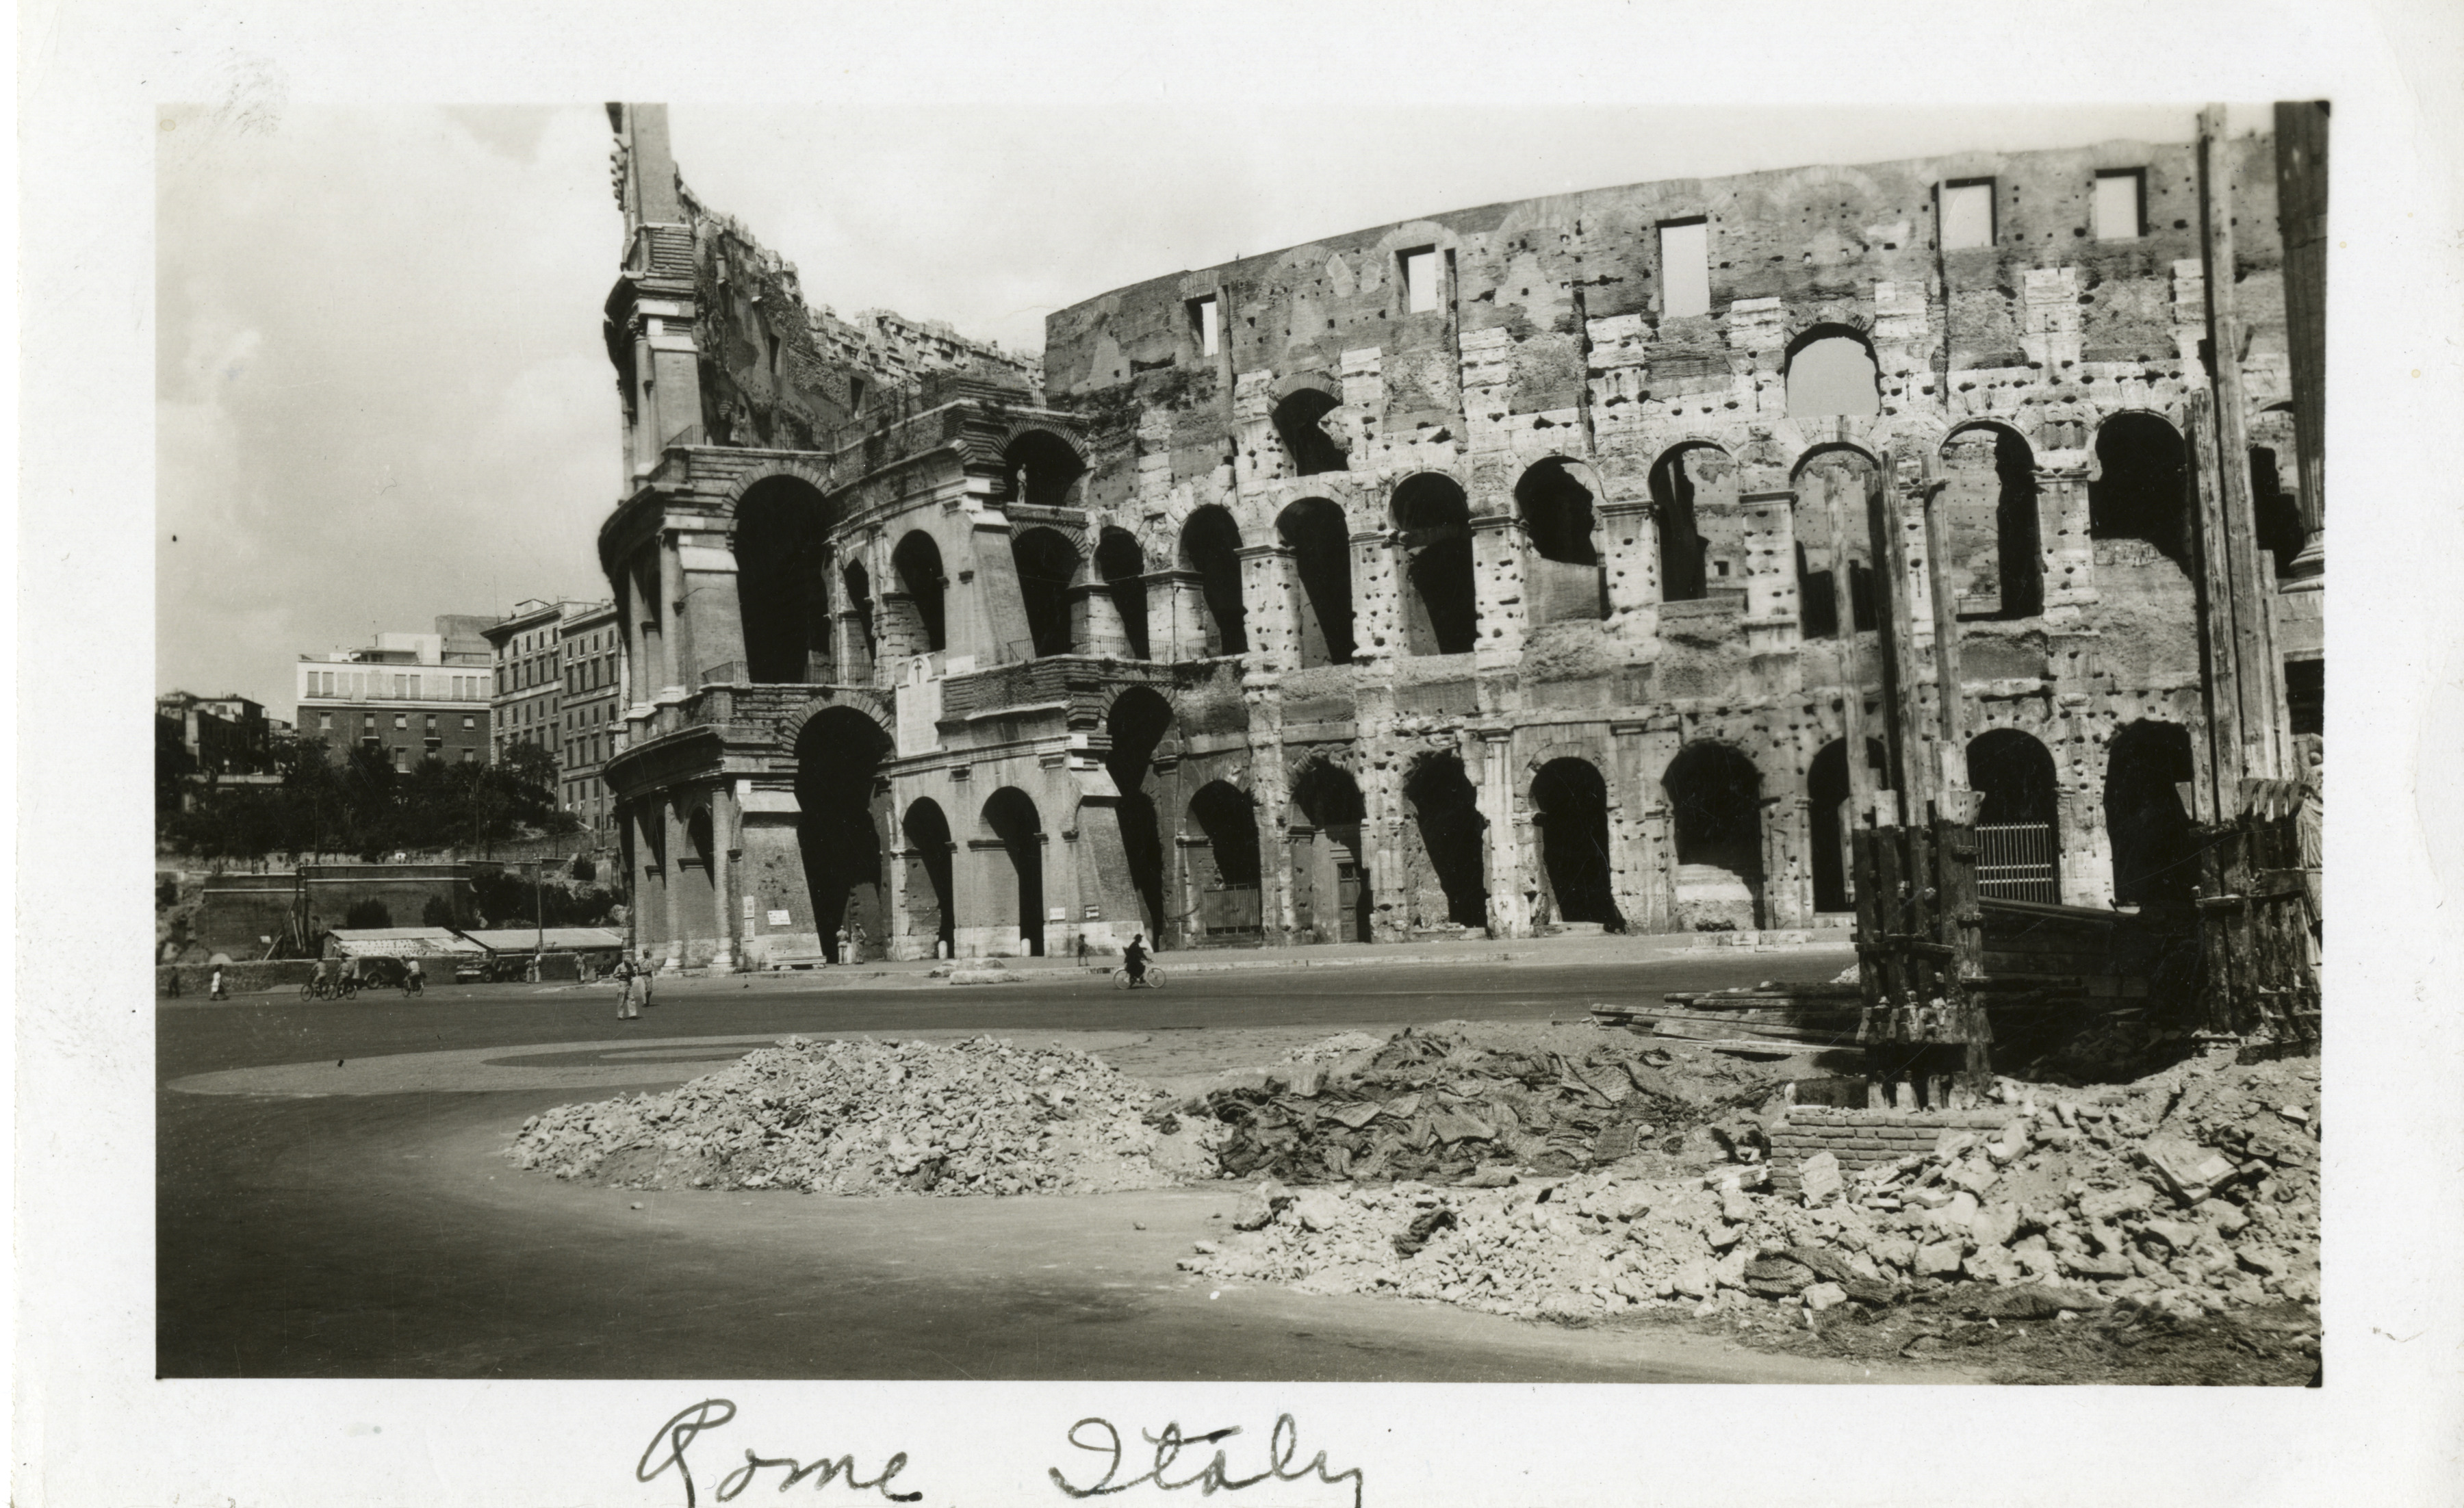 The Coliseum in Rome | The Digital Collections of the National WWII Museum : Oral Histories